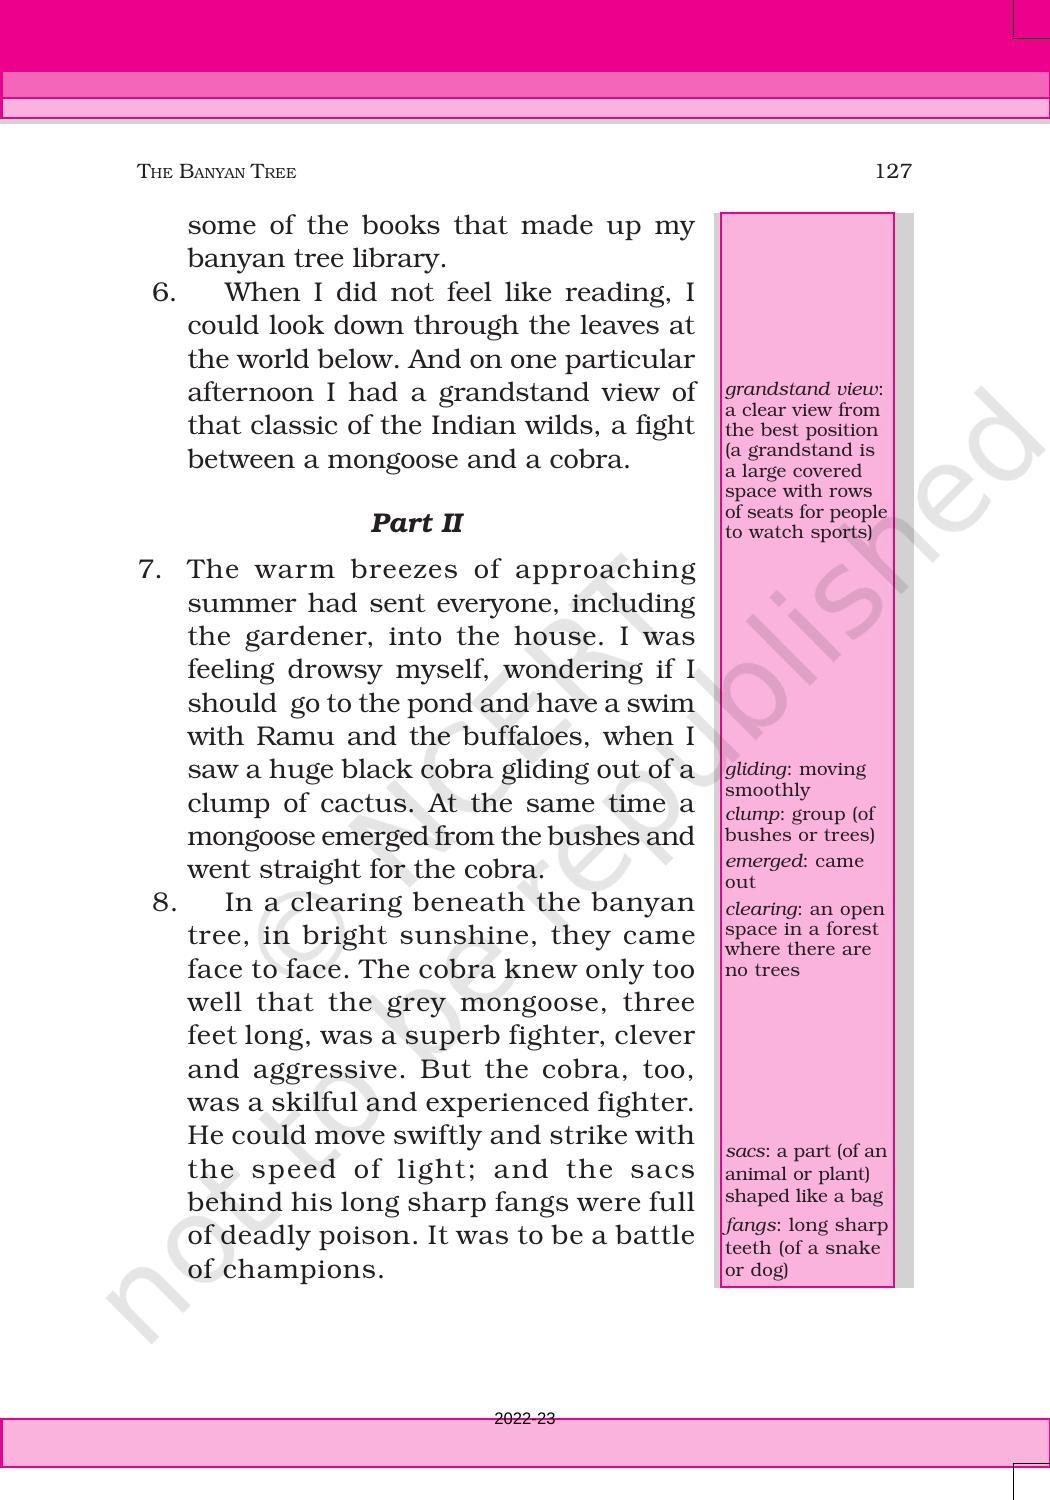 NCERT Book for Class 6 English(Honeysuckle) : Chapter 10-The Banyan Tree - Page 4